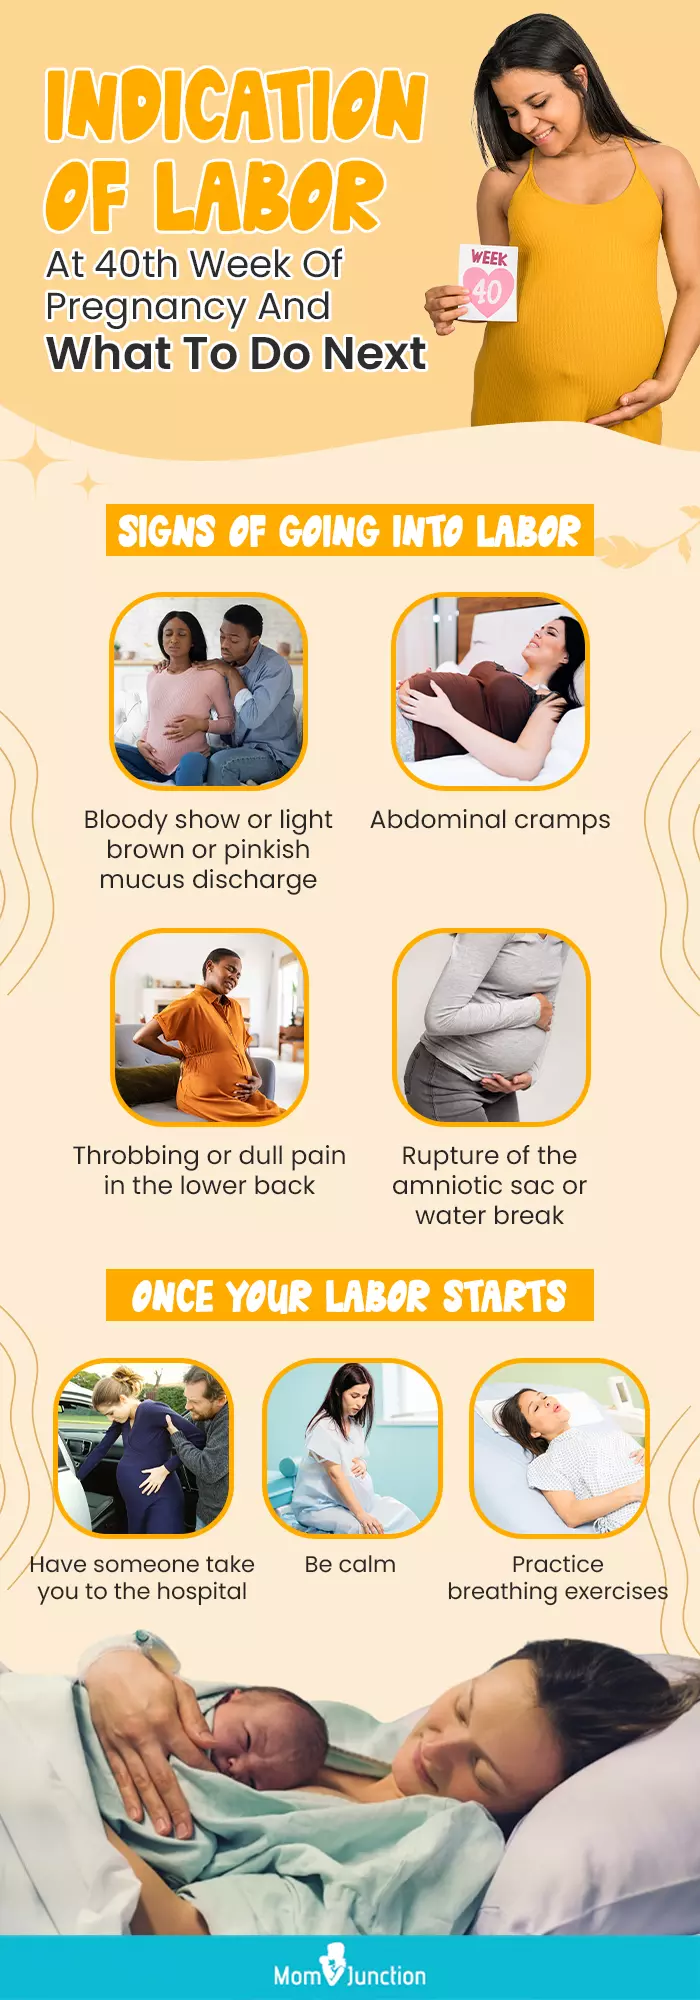 indication of labor at 40th week of pregnancy and what to do next (infographic)